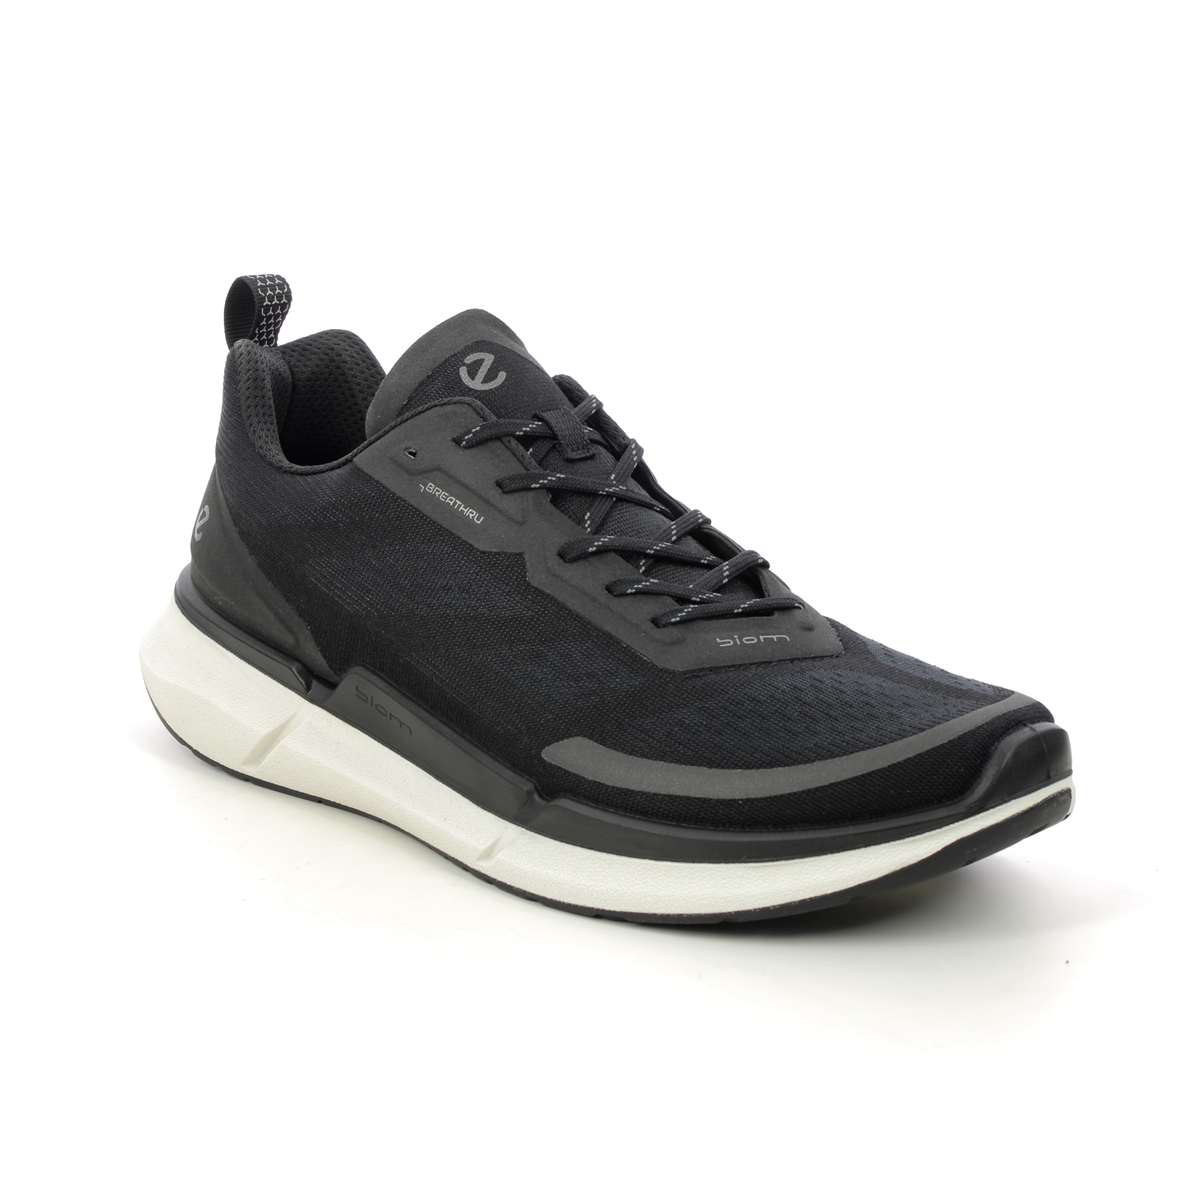 ECCO Biom 2.2 Mens Black White Mens trainers 830754-00001 in a Plain Man-made in Size 46